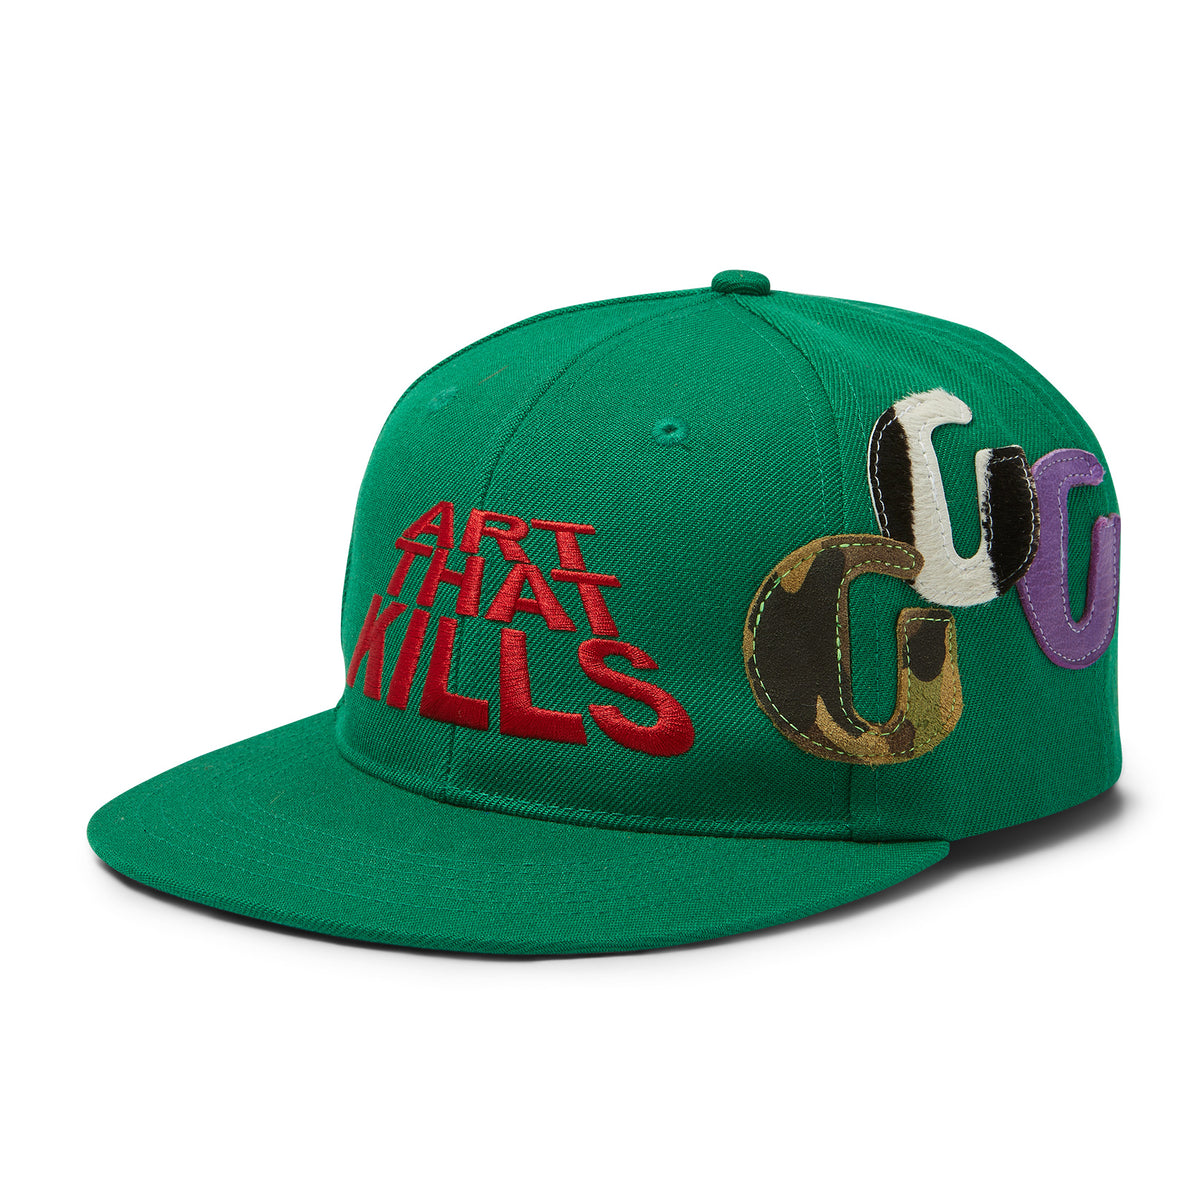 ATK G-PATCH GREEN FITTED CAP